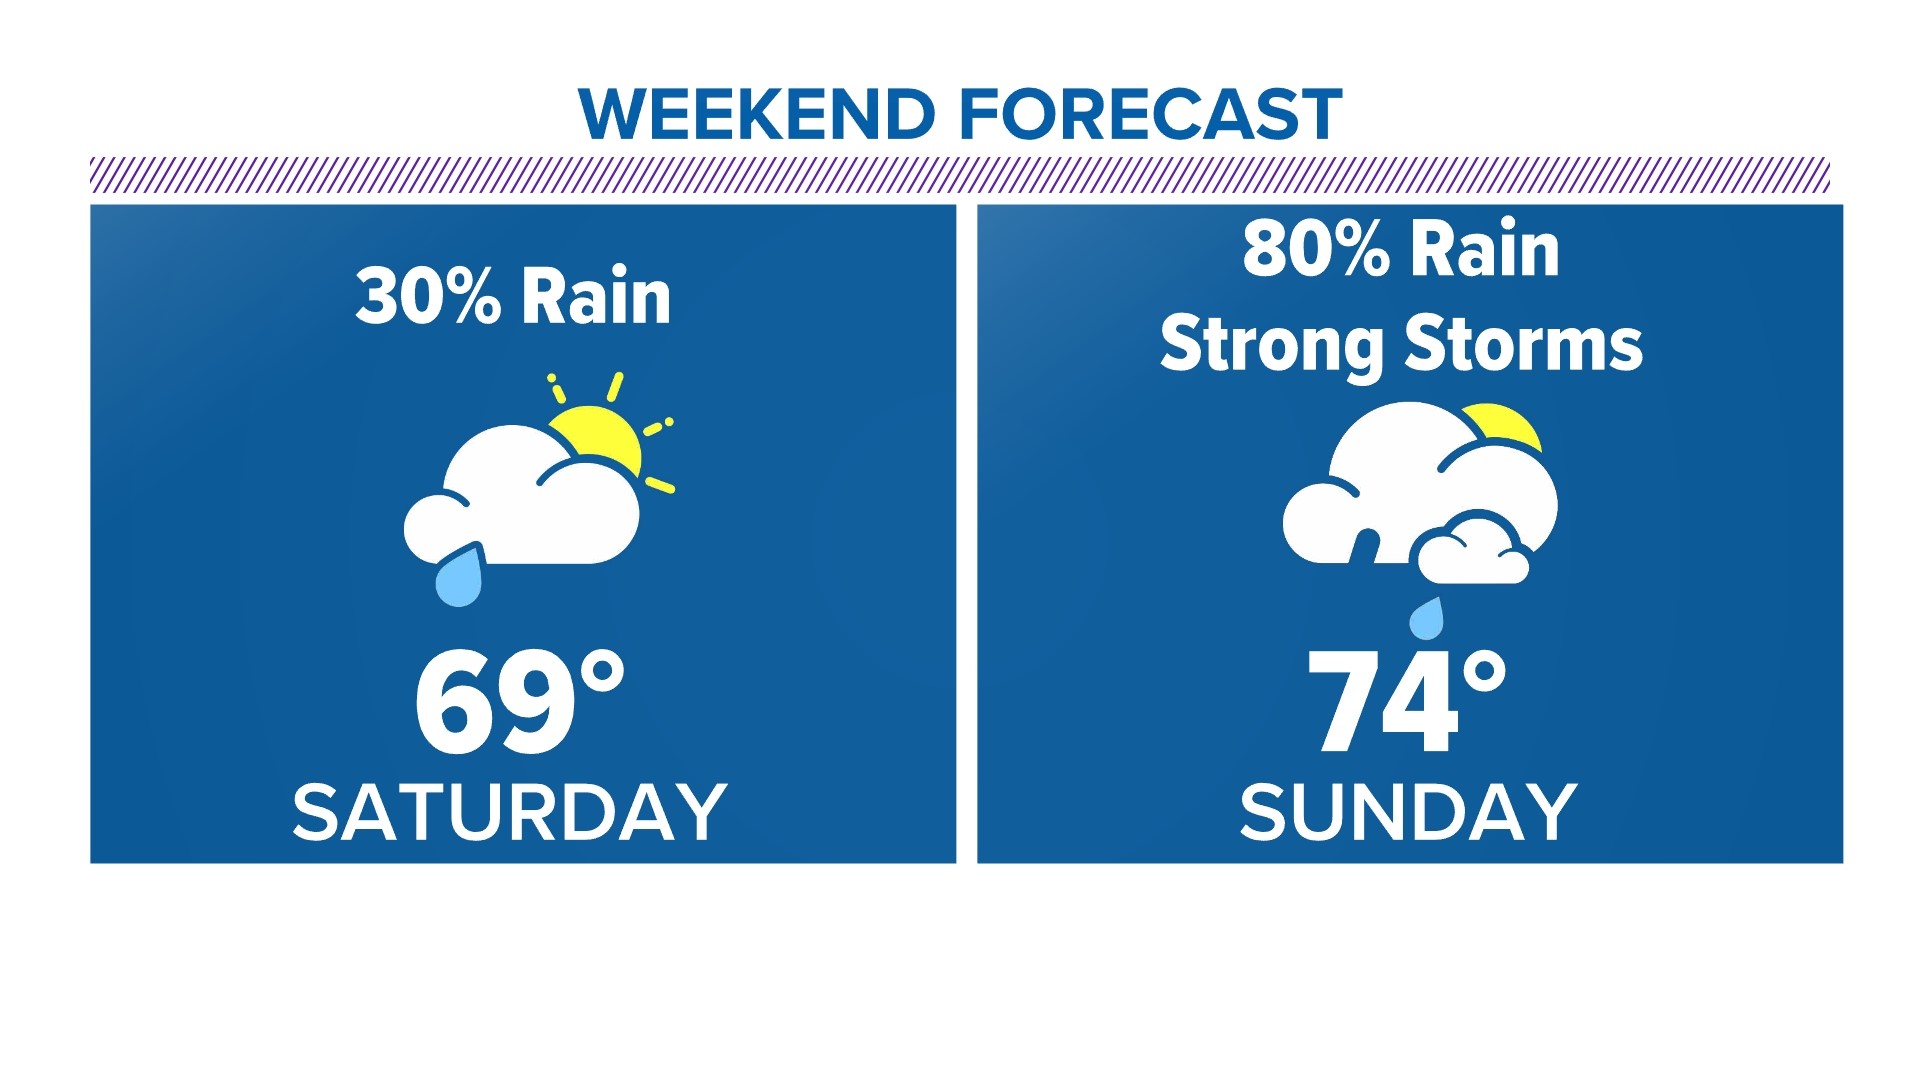 Saturday's rain chances are only between 30% and 40% so it will not be a washout of a day.